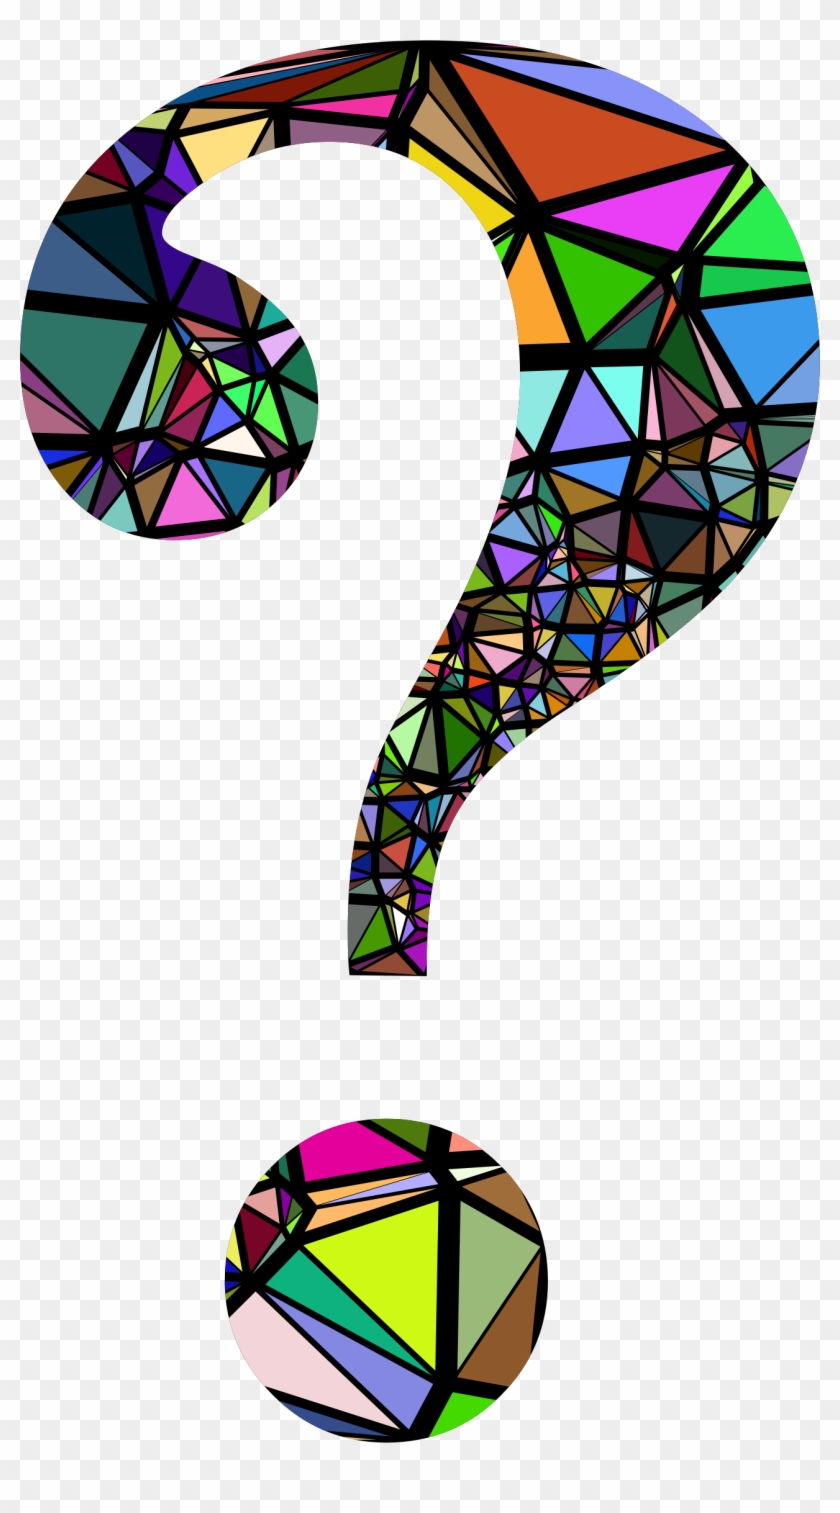 More From My Site - Question Mark With Transparent Background #12467